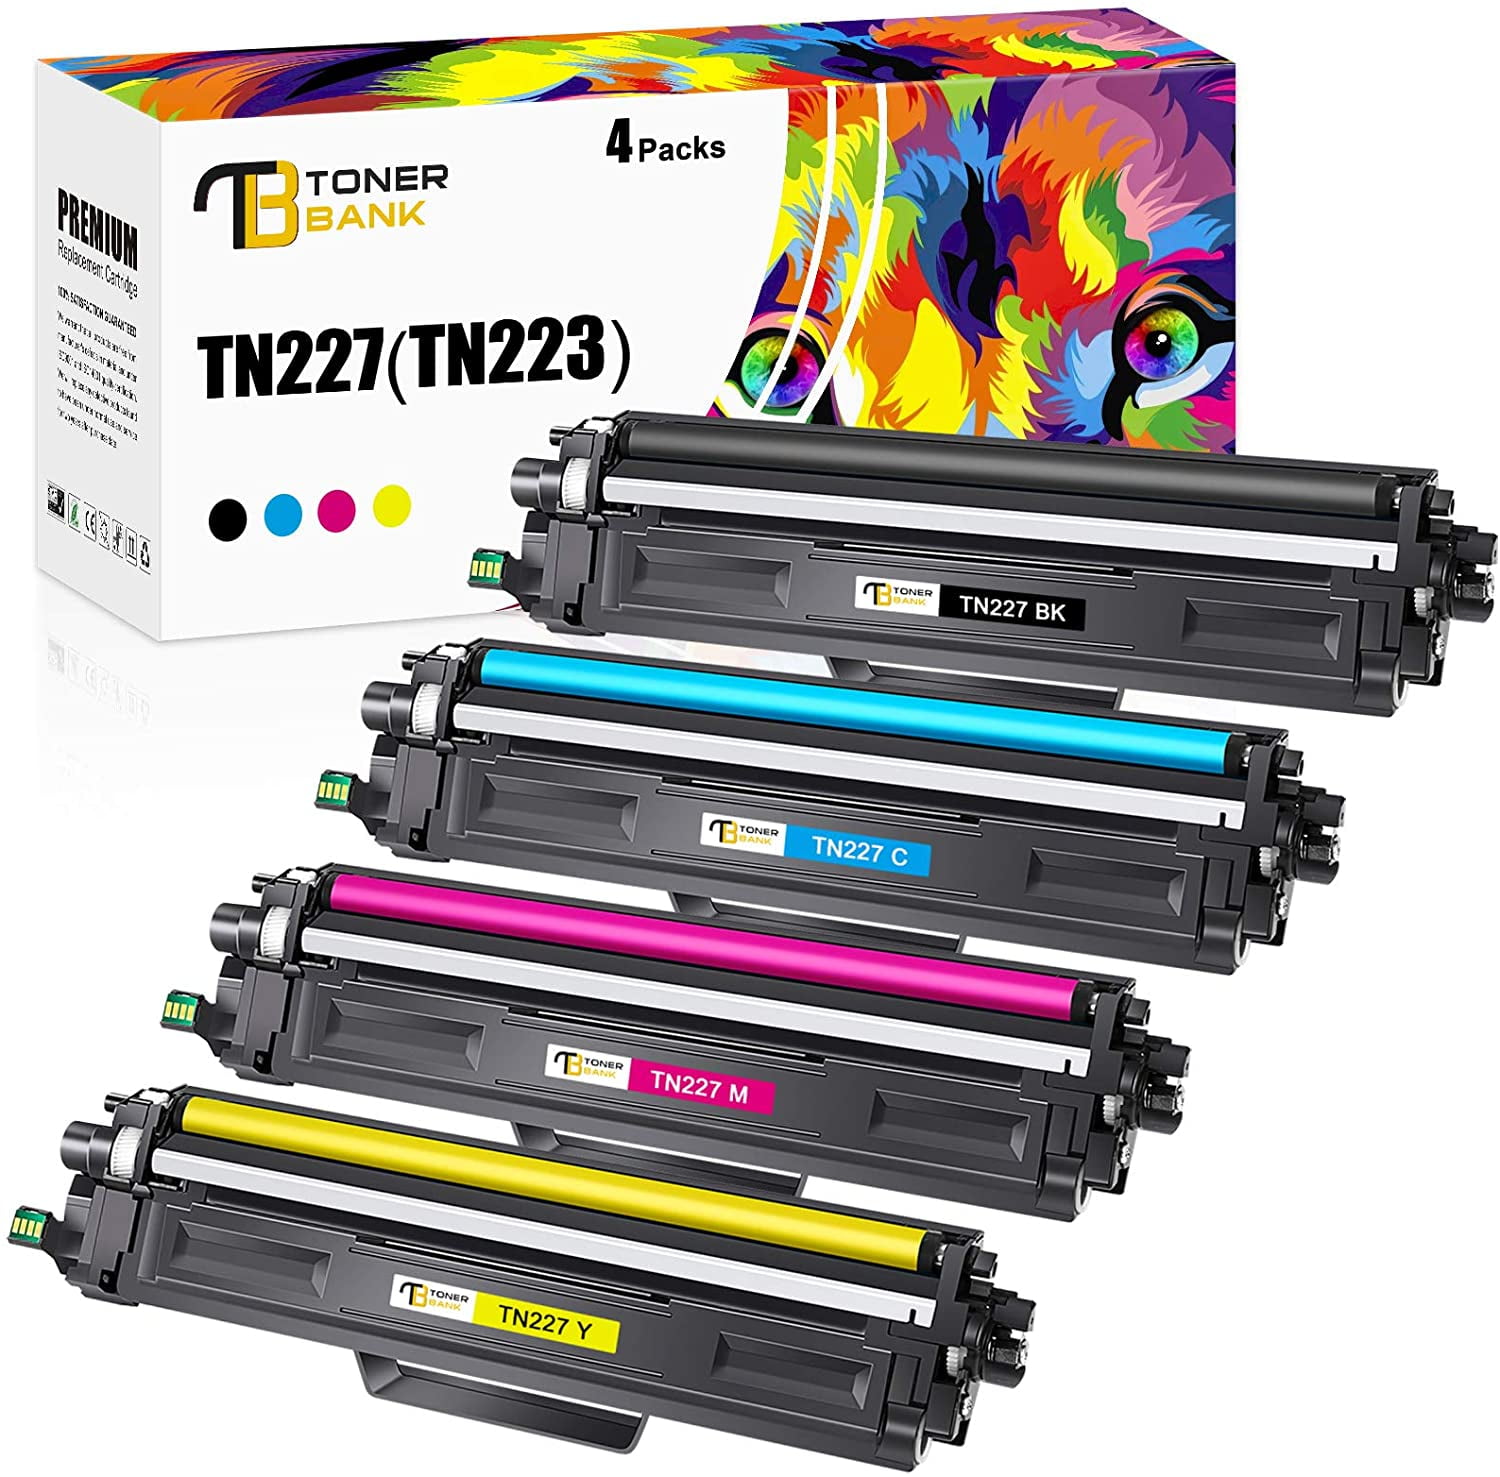 Cannot Detect - Put the Toner Cartridge back in - Brother MfcL3745cdw  L3750CDW L3770CDW TONER ERROR 